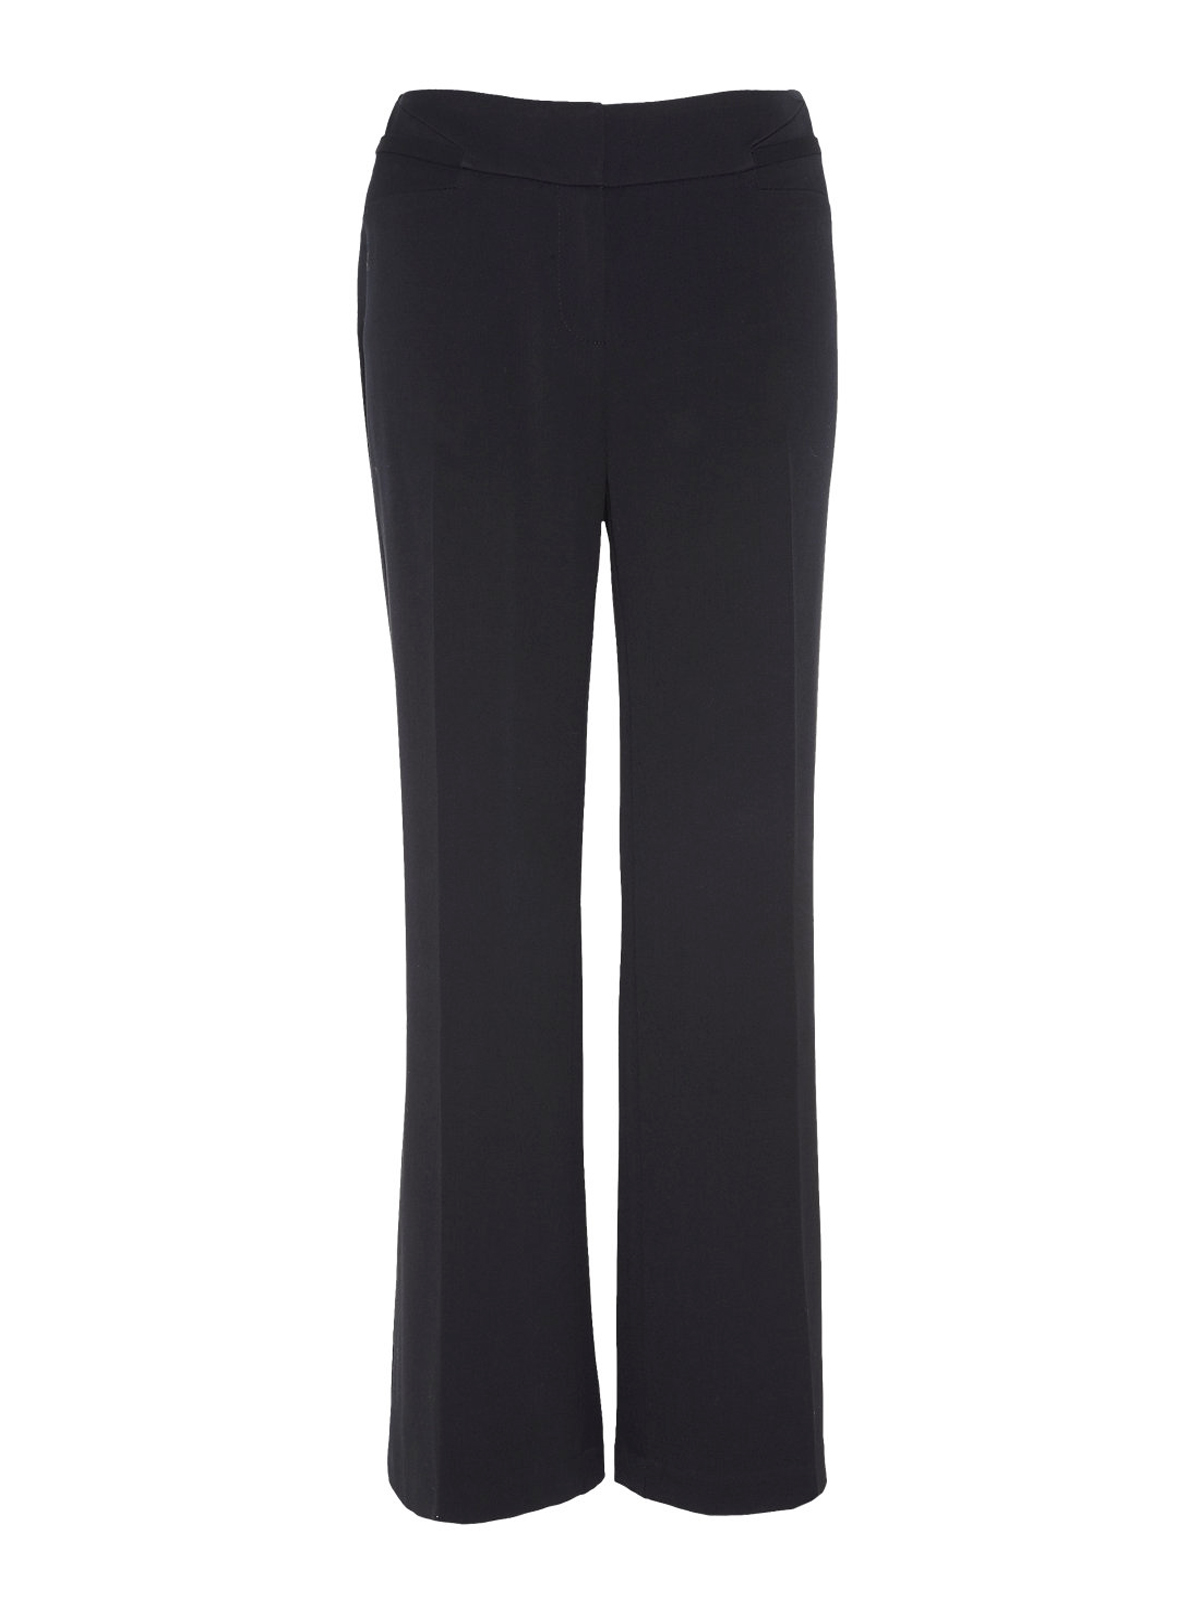 Marks and Spencer - - M&5 ASSORTED Ladies Trousers - Size 12 to 20